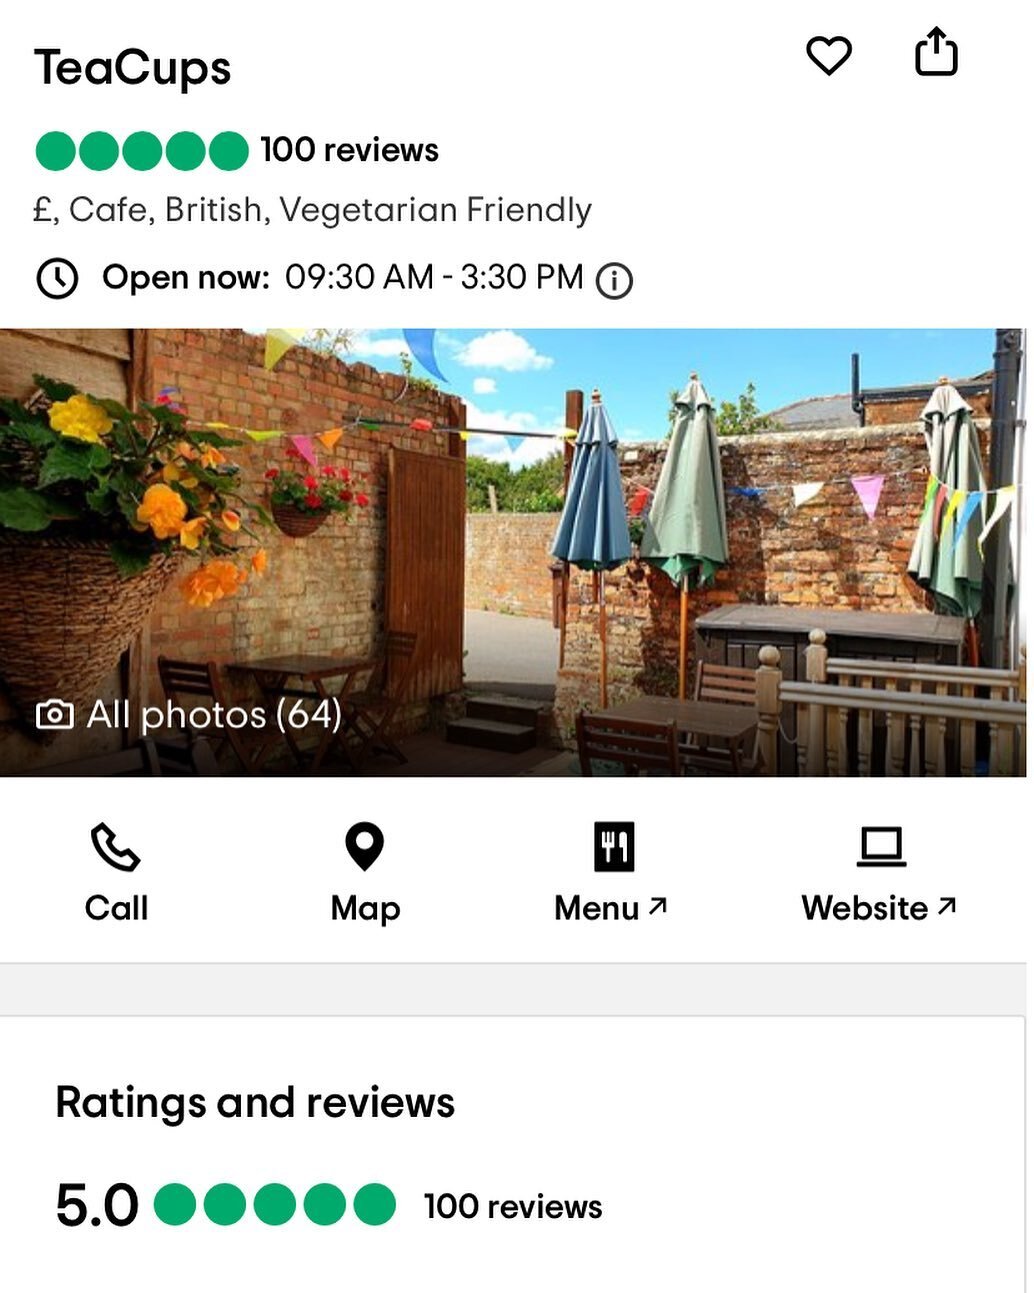 We were very pleased to get our 100th TripAdvisor review this weekend! 
It&rsquo;s really appreciated when people take the time to leave a review - it can make a big difference to a small business 
.
.
.
#romsey #cafe #tripadvisor #tripadvisorreview 